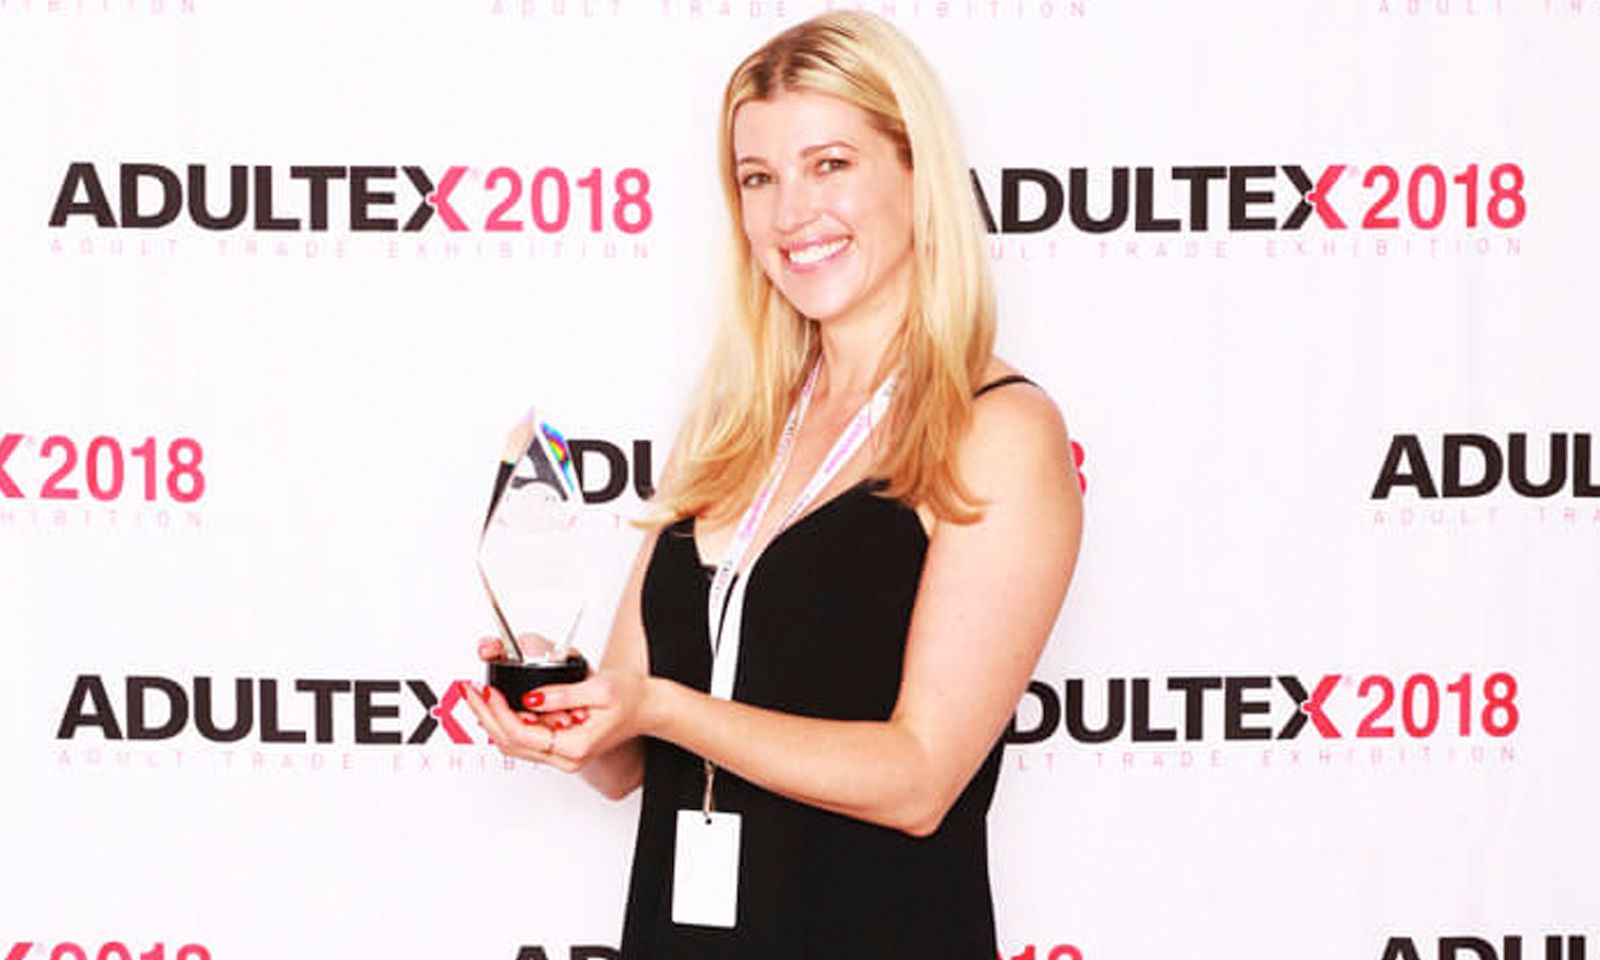 The Cowgirl Wins AdultEx Award for Best New Product